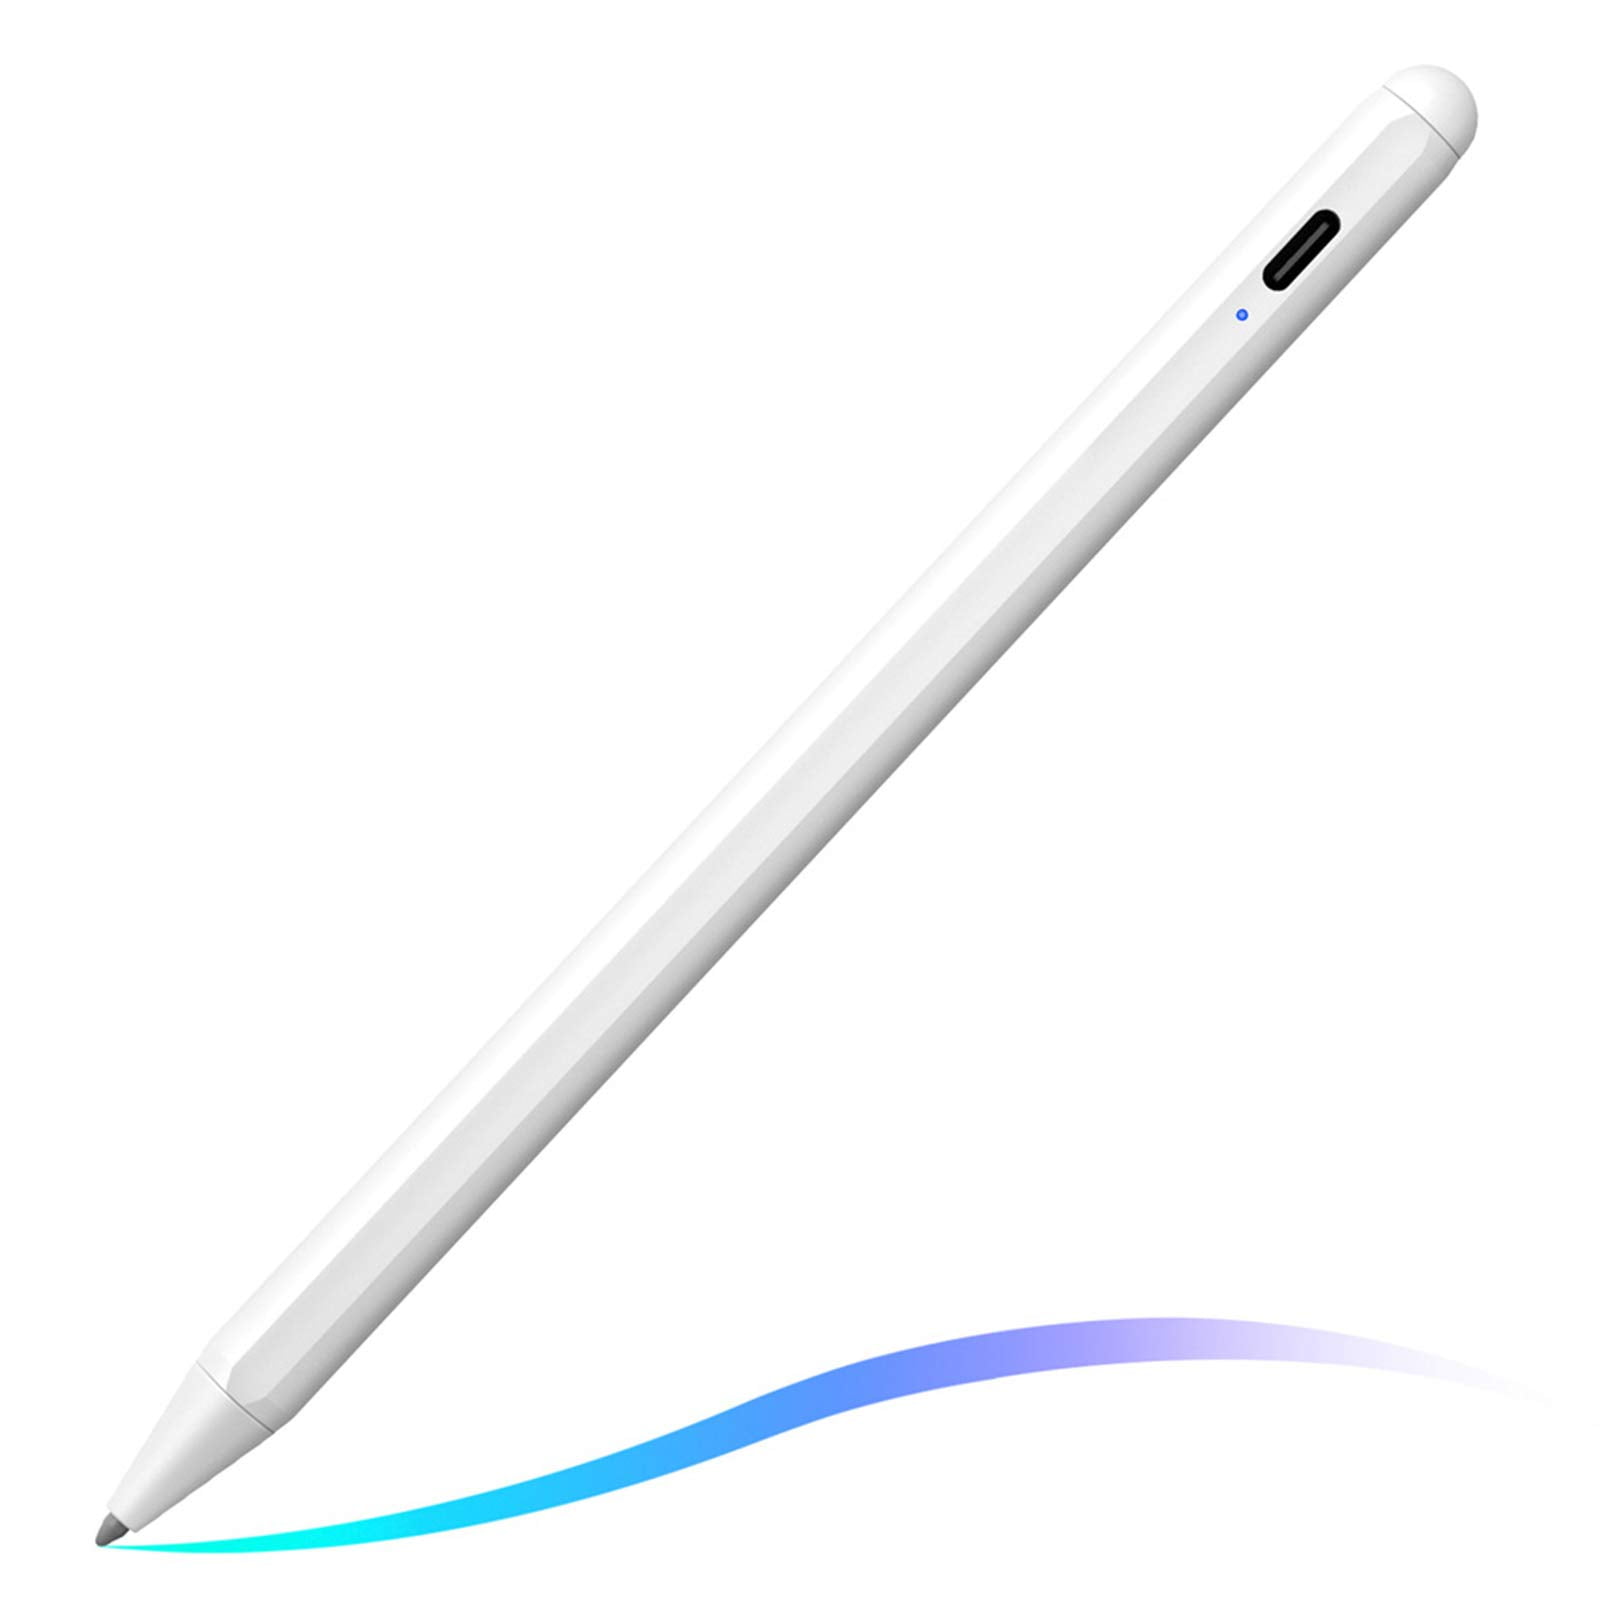 11/12.9 Inch 2018 2019 2020 2021 iPad Mini 5th Gen iPad Air 3rd 4th Gen Apple M1 iPad Pro Stylus Pen for iPad with Palm Rejection Ivory White iPad 7th/8th Gen Active Pencil Compatible with 